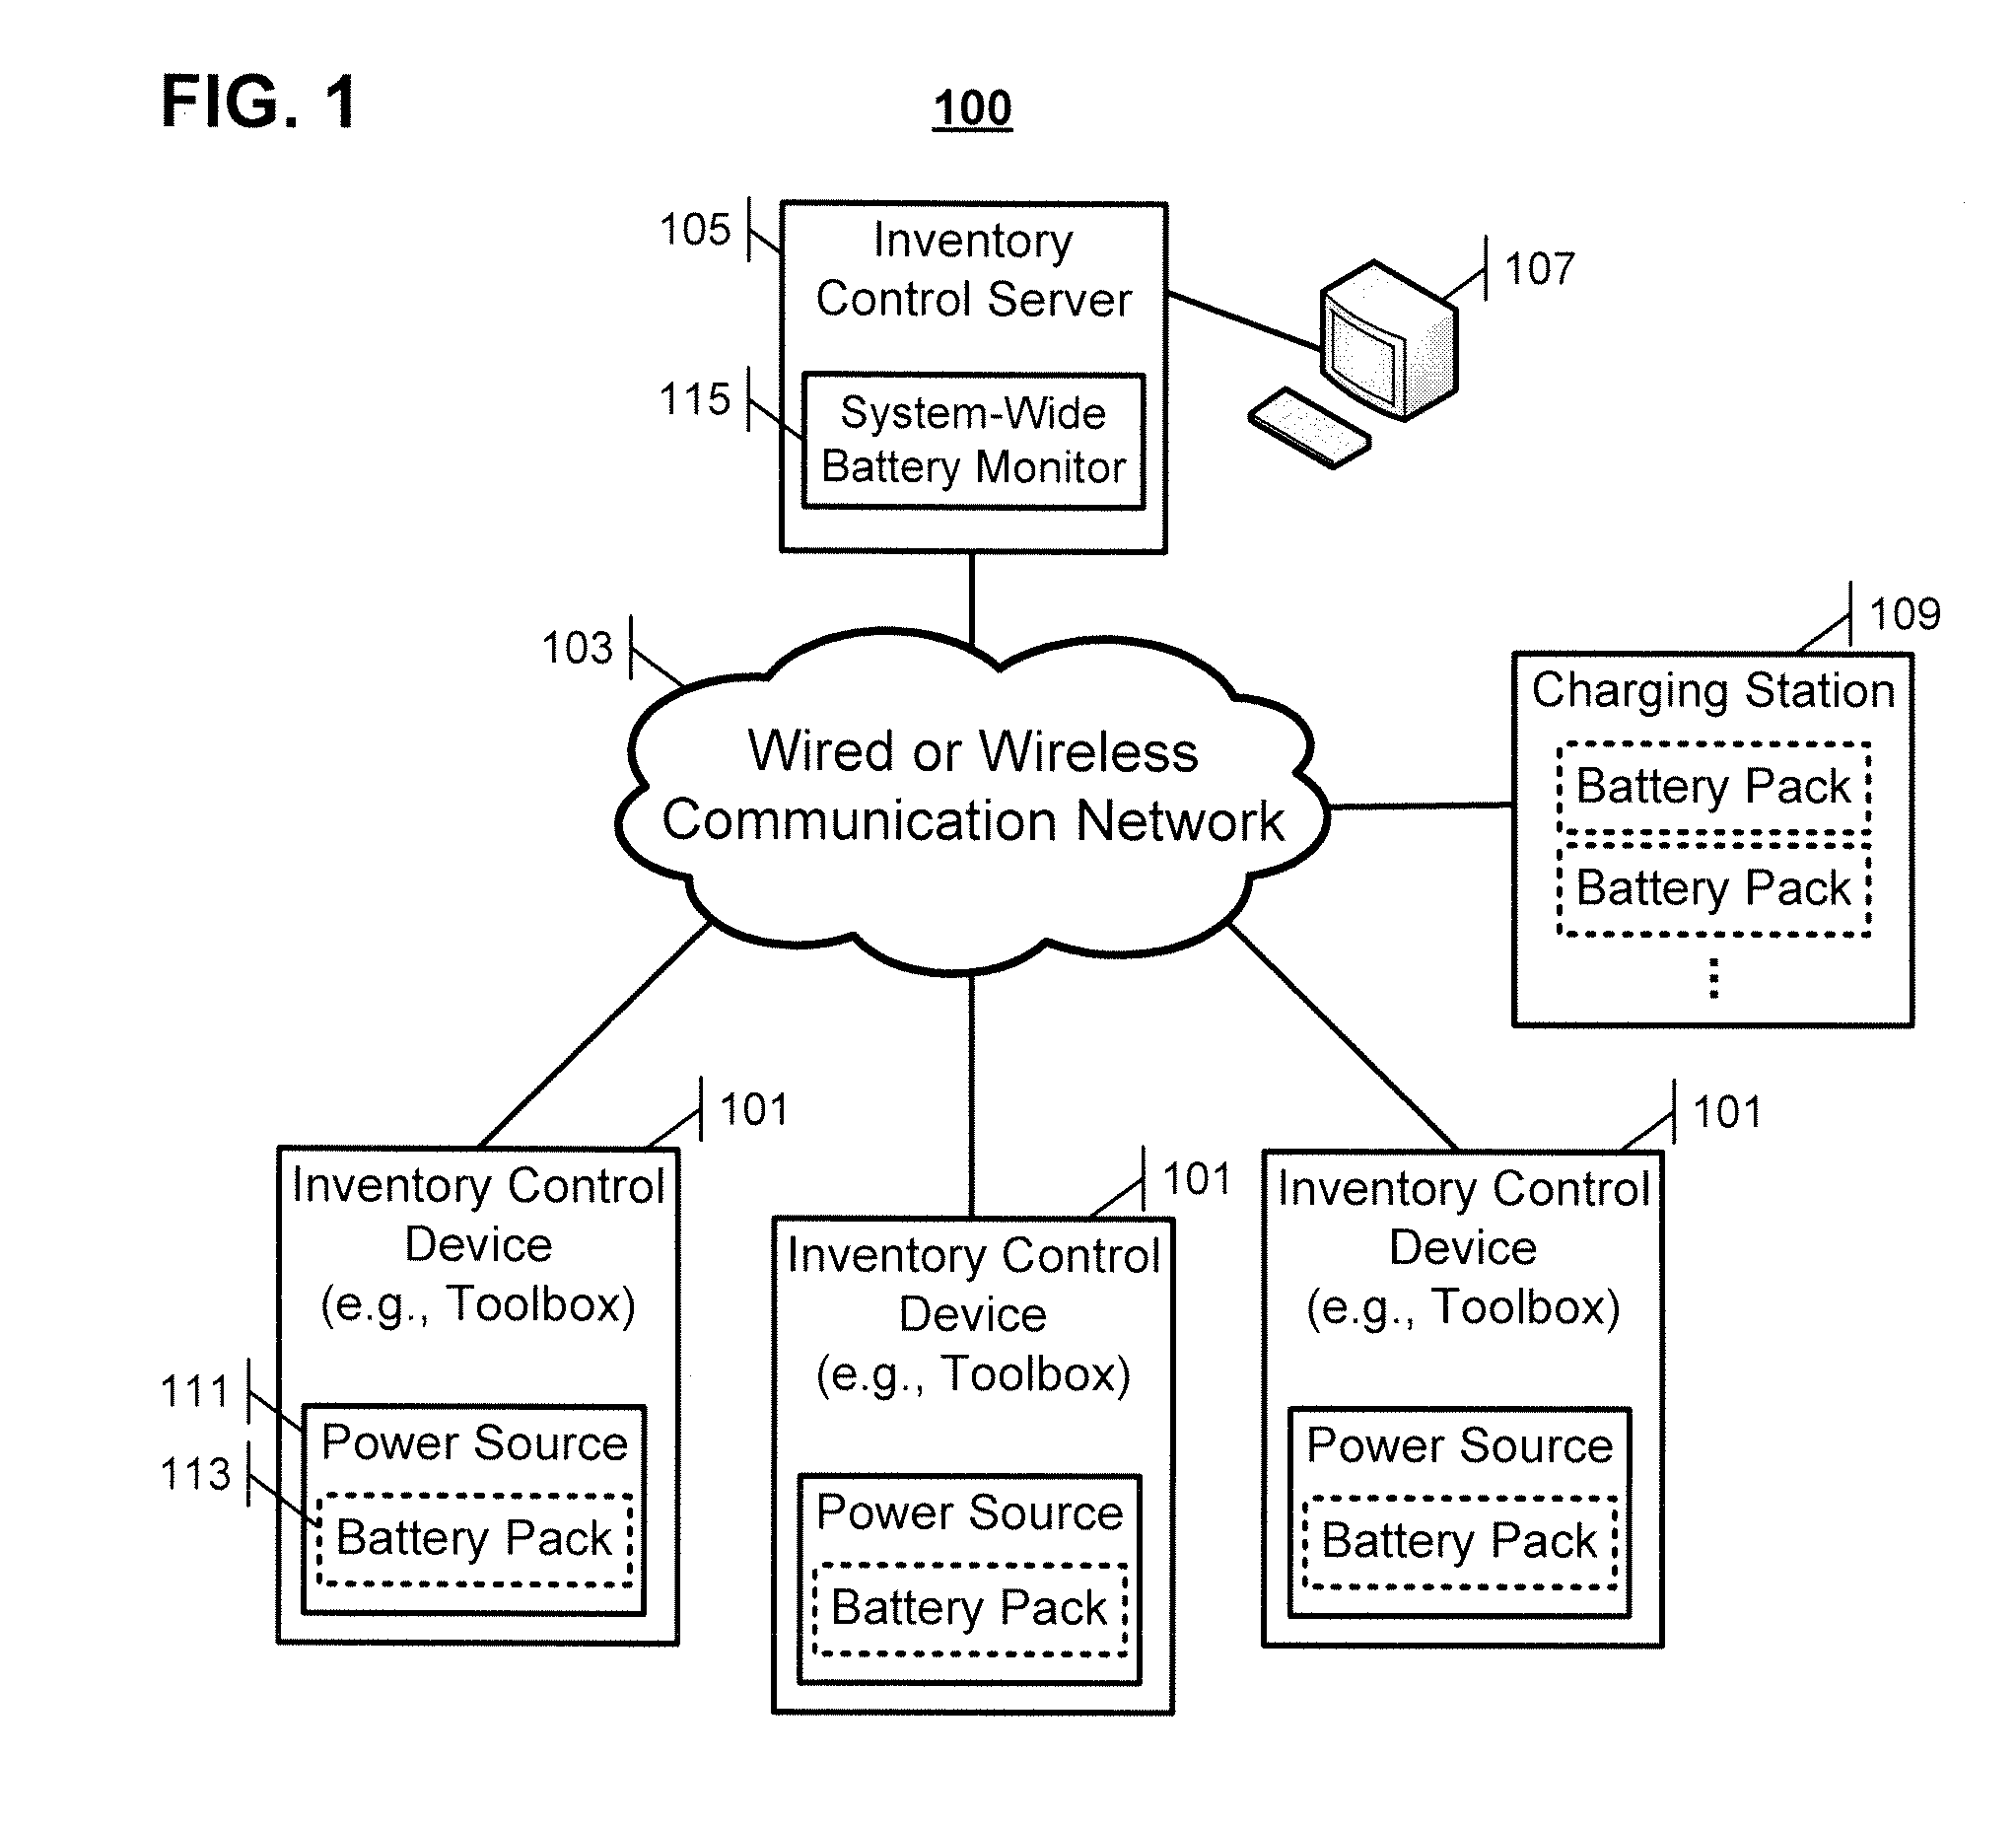 Battery monitoring in a networked inventory control system